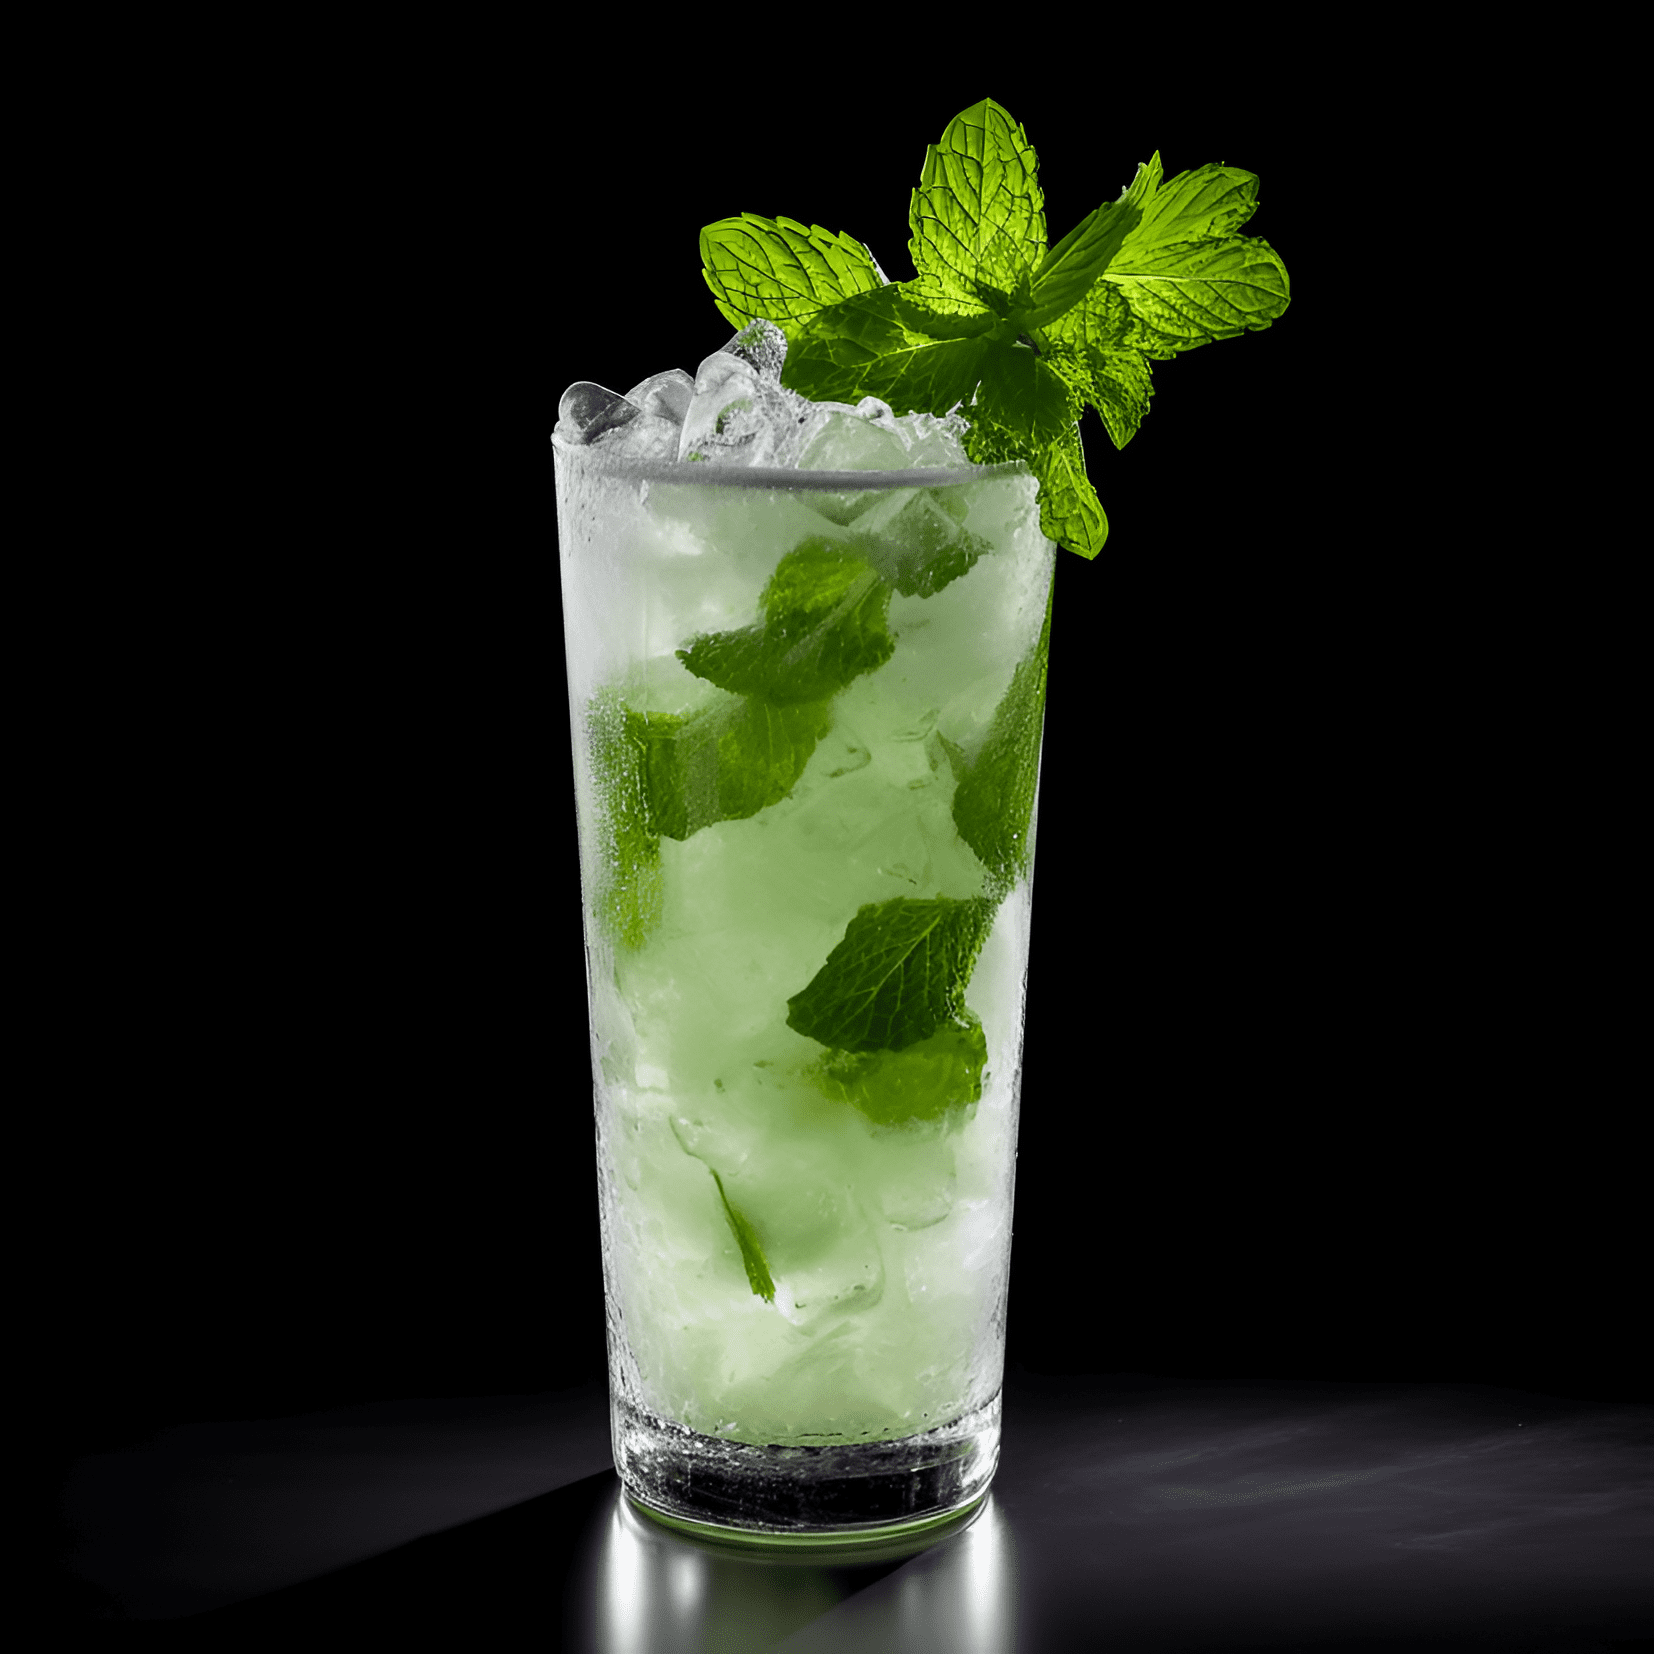 Minty Fresh Cocktail Recipe - The Minty Fresh cocktail is a delightful blend of sweet, sour, and minty flavors. The combination of fresh mint leaves, lime juice, and simple syrup creates a refreshing and invigorating taste that is perfect for warm weather. The addition of rum adds a subtle sweetness and warmth, while the soda water provides a light, effervescent finish.